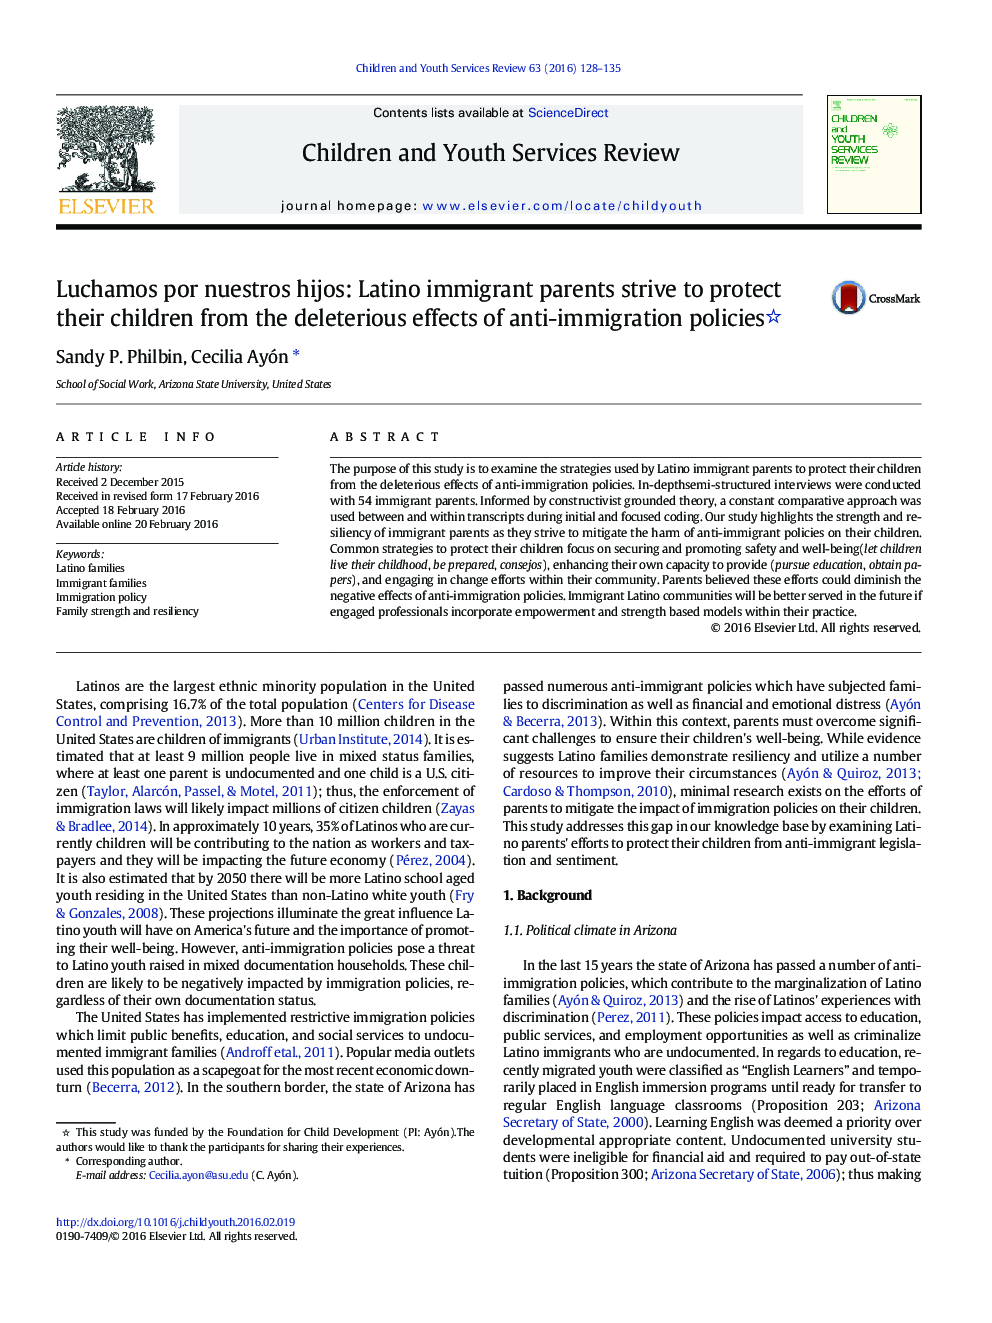 Luchamos por nuestros hijos: Latino immigrant parents strive to protect their children from the deleterious effects of anti-immigration policies 